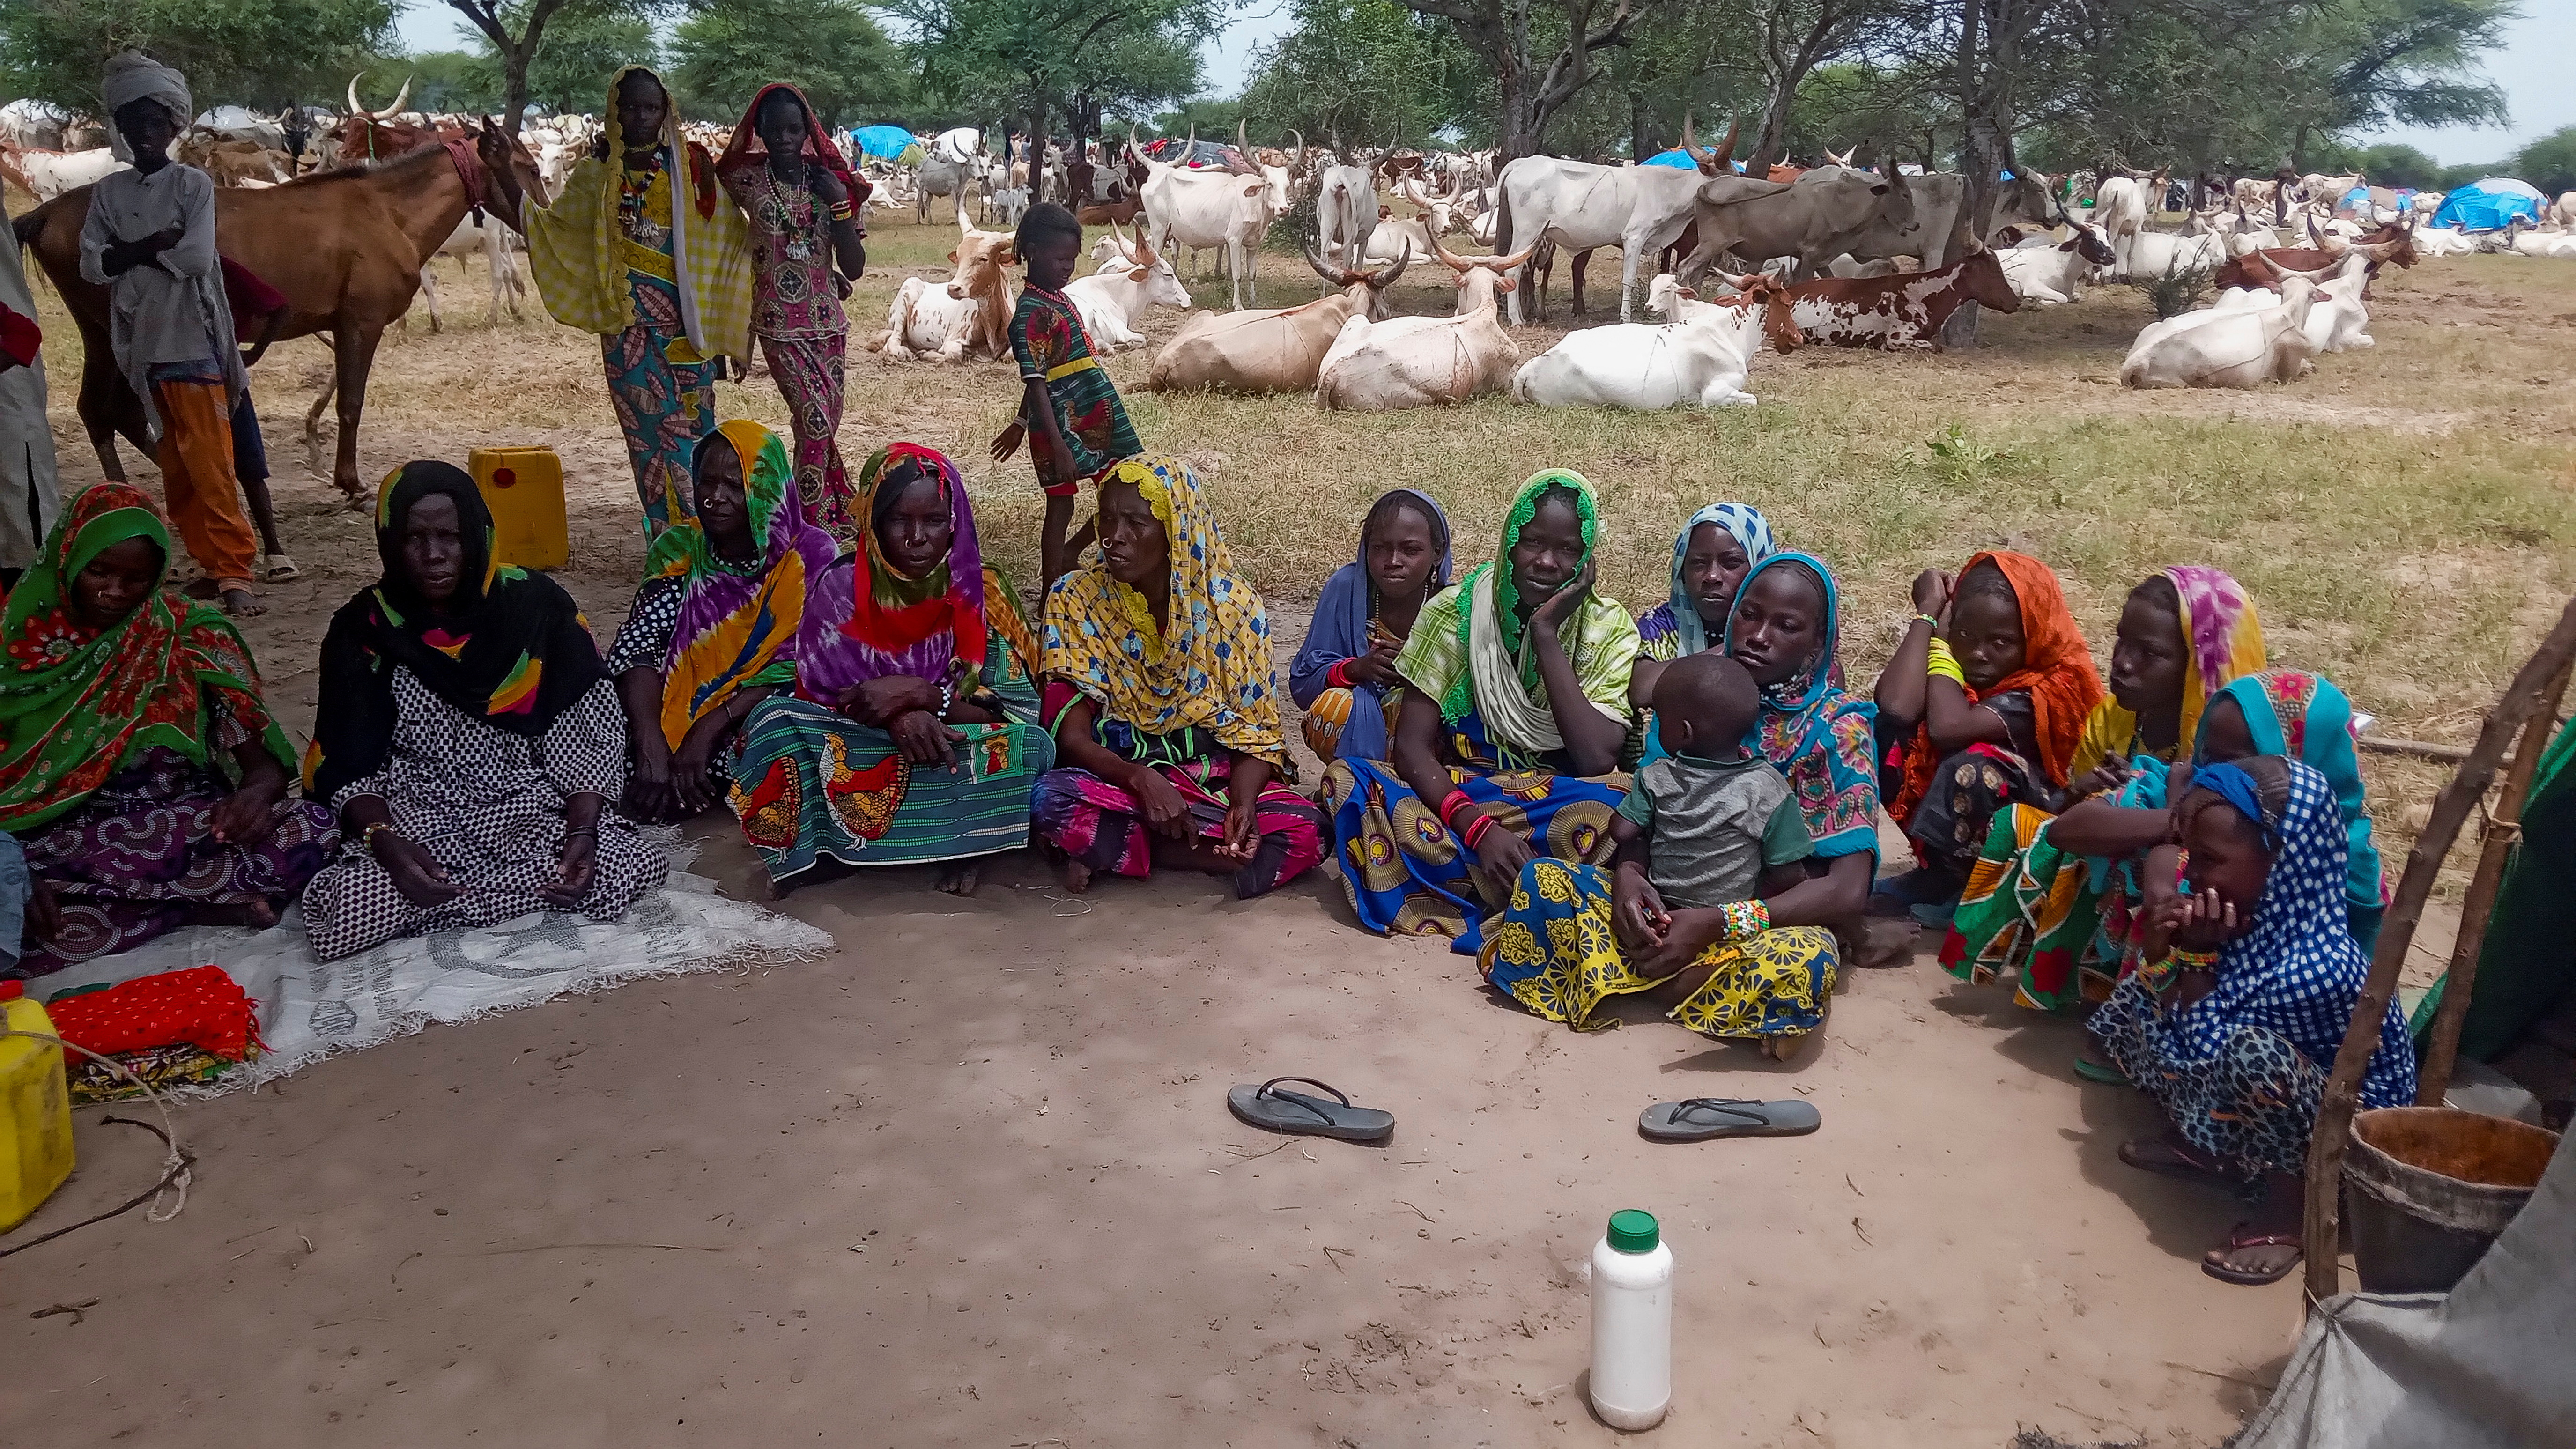 Nomadic cattle herders seek new pastures in Lake Chad province